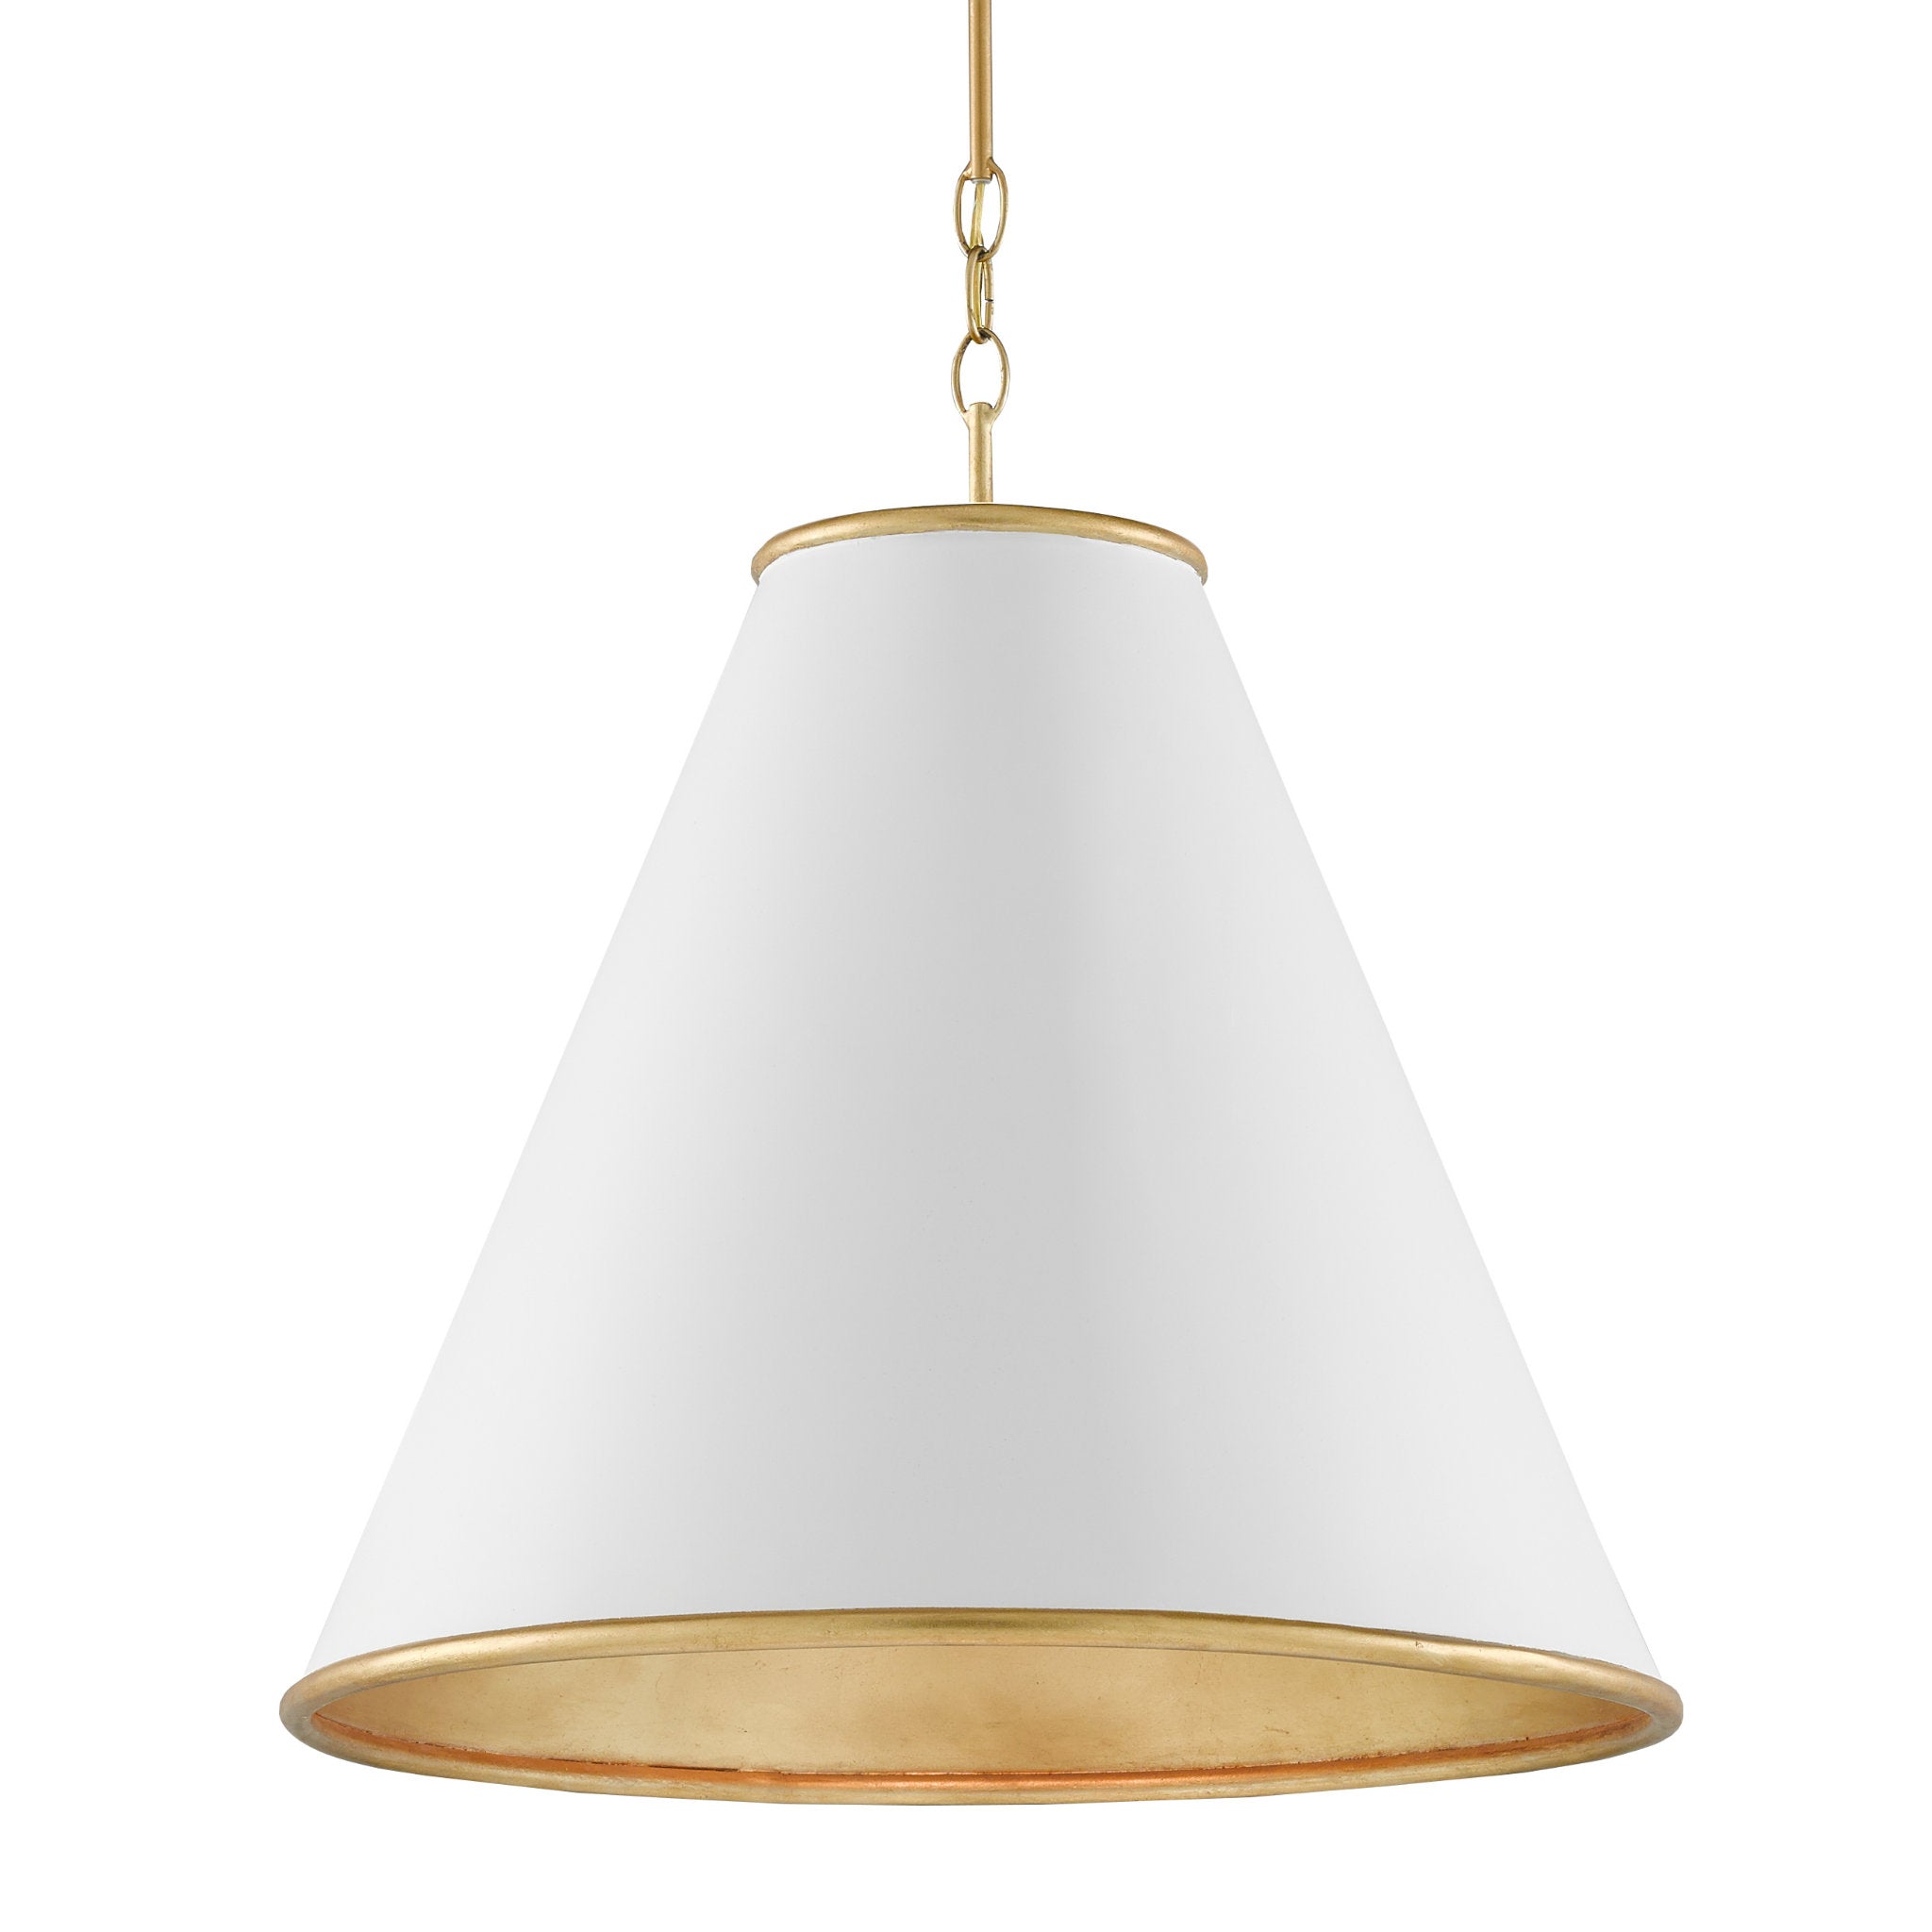 Pierrepont Large White Pendant - Painted Gesso White/Contemporary Gold Leaf/Painted Gold